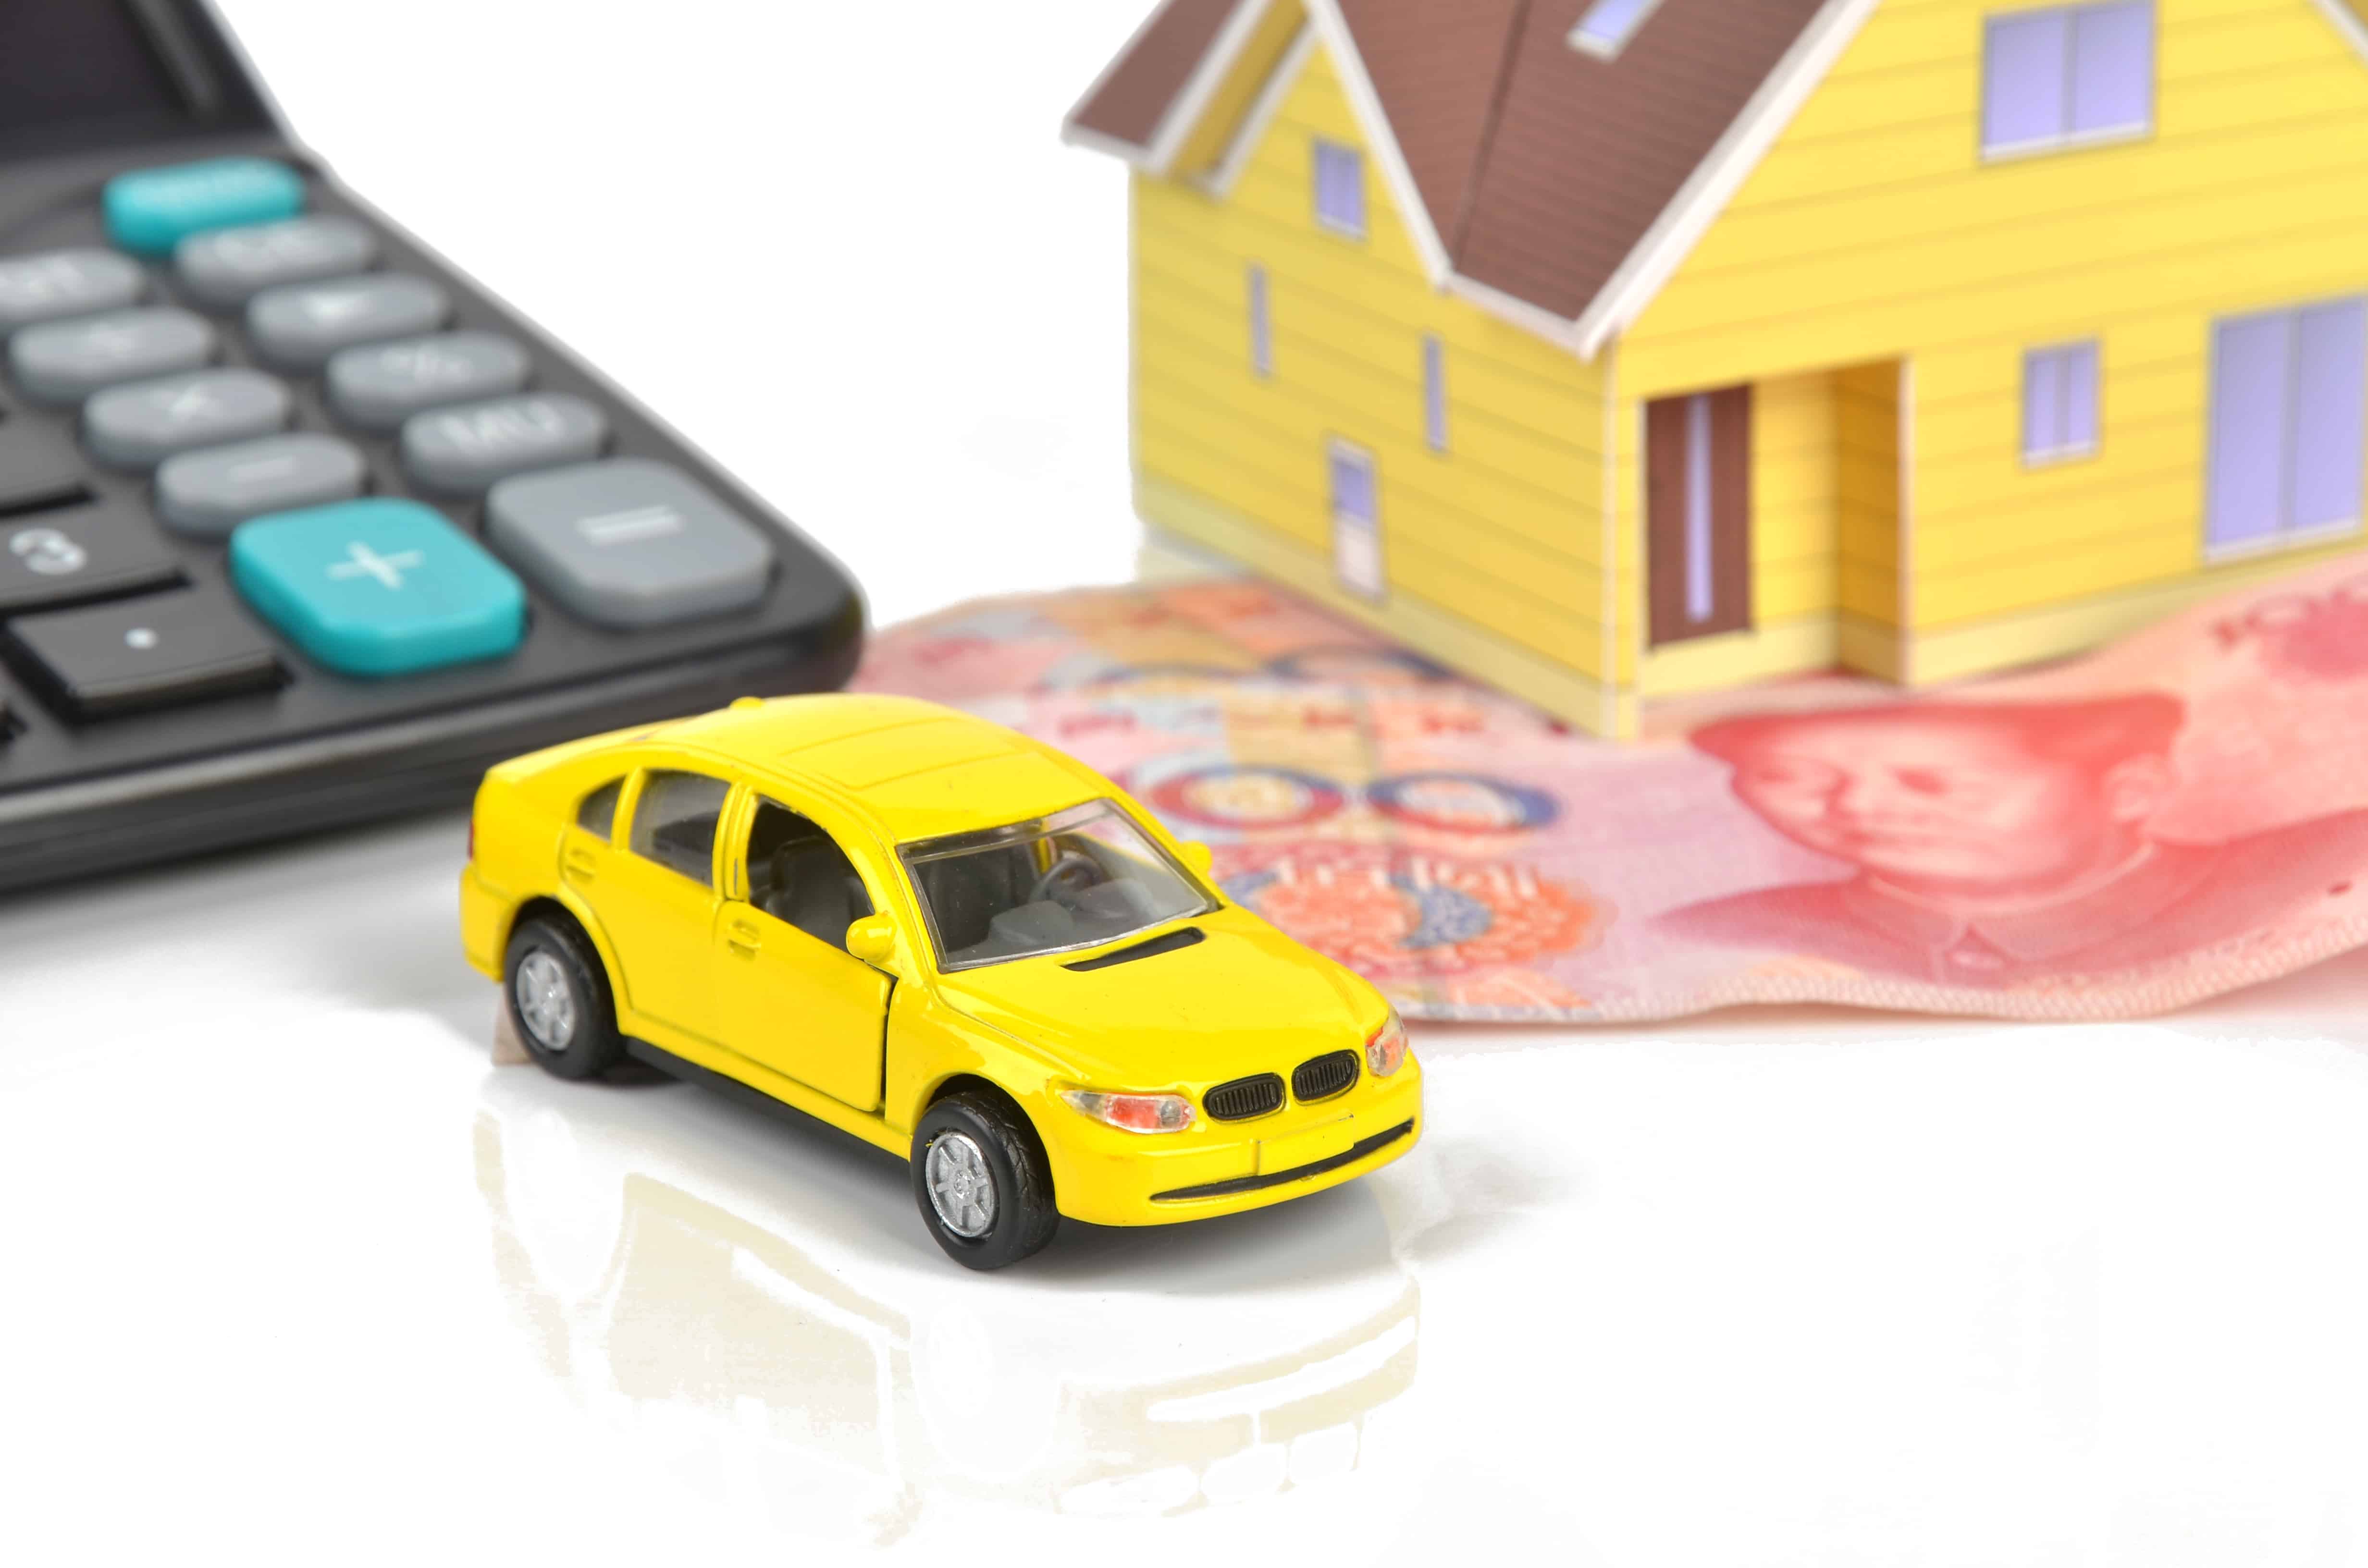 Miniature car and house next to a calculator and currency notes, representing financial planning for home first trial expenses.